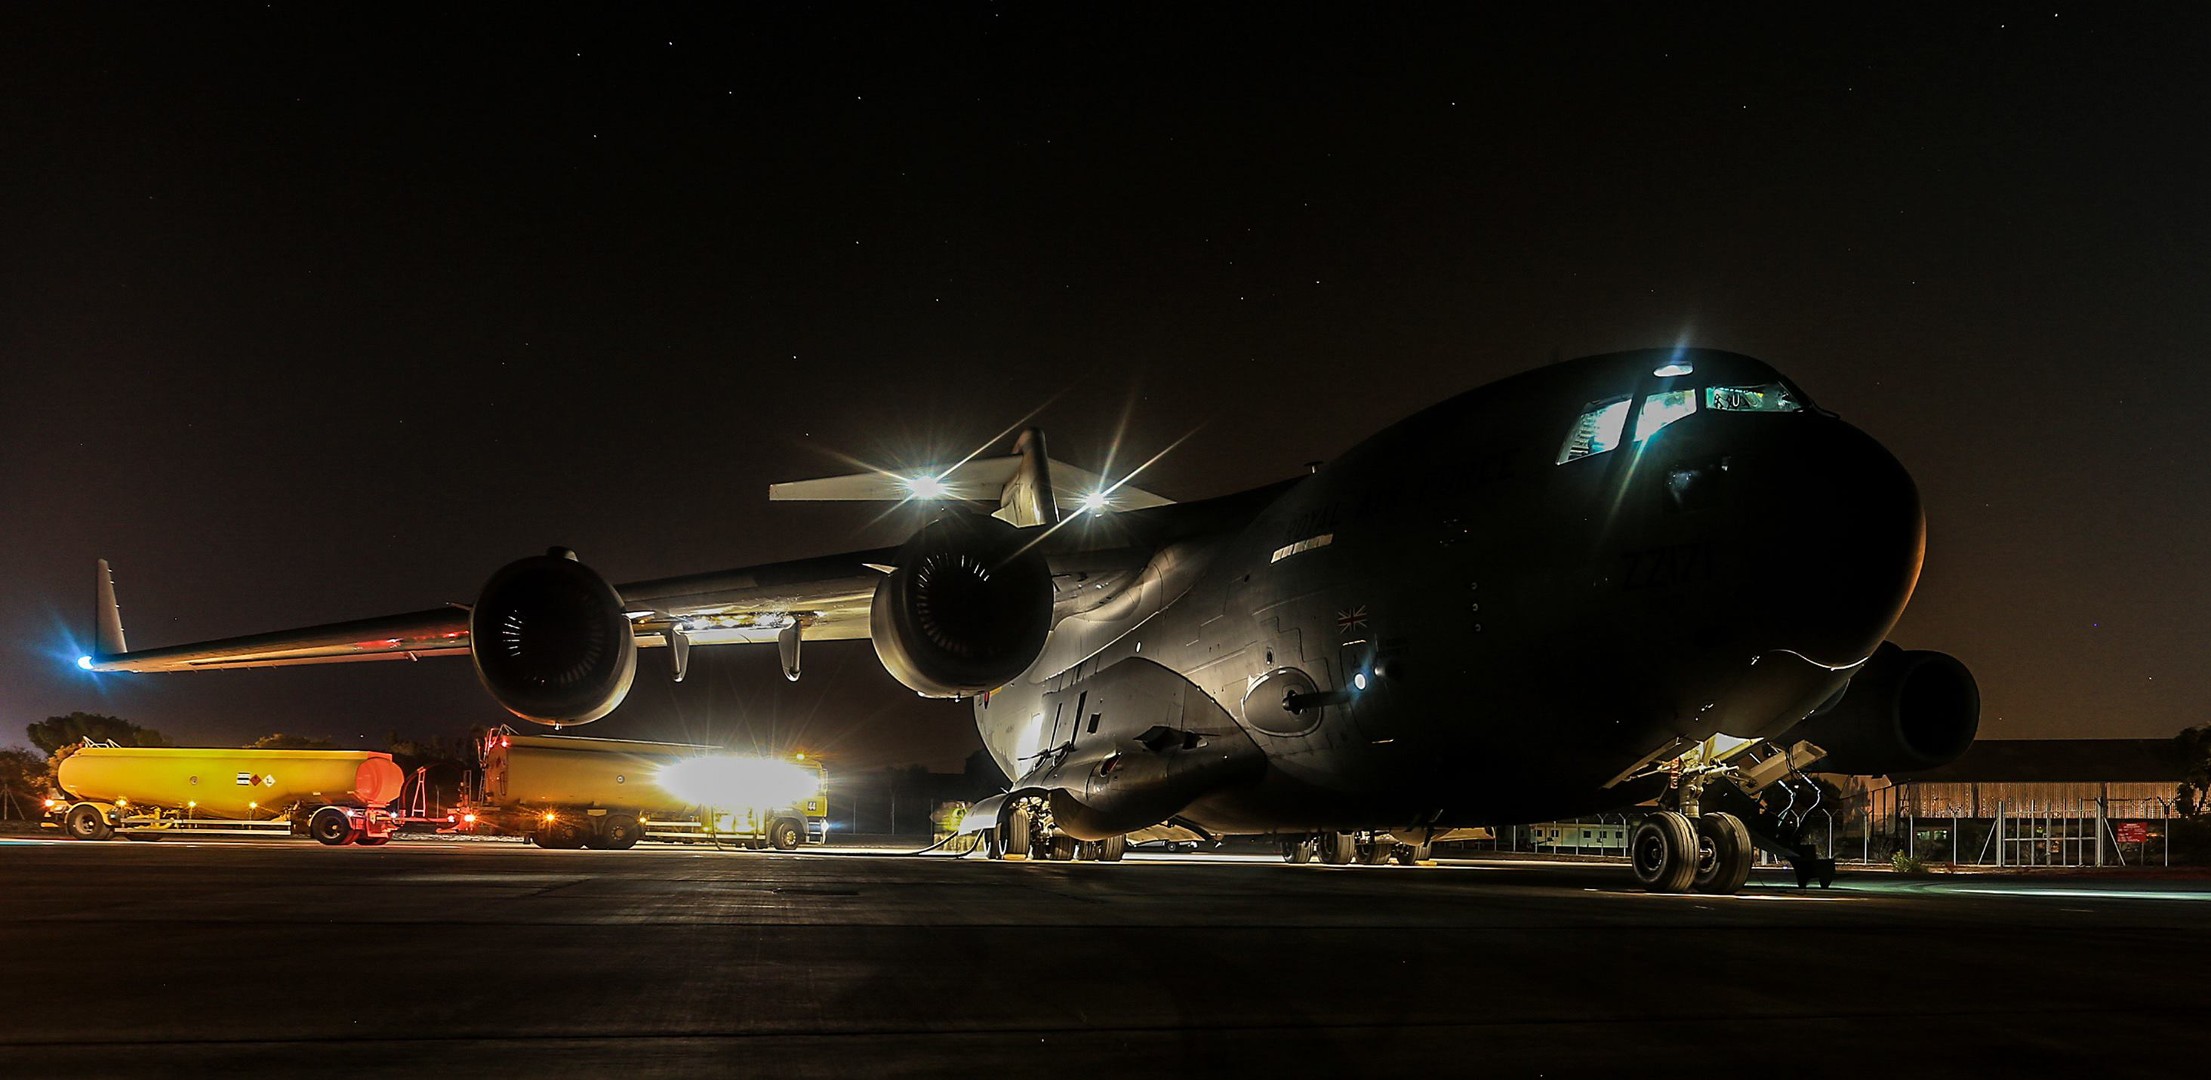 General 2211x1080 military military aircraft Boeing C-17 Globemaster III military vehicle vehicle aircraft Royal Air Force night refueling American aircraft Boeing